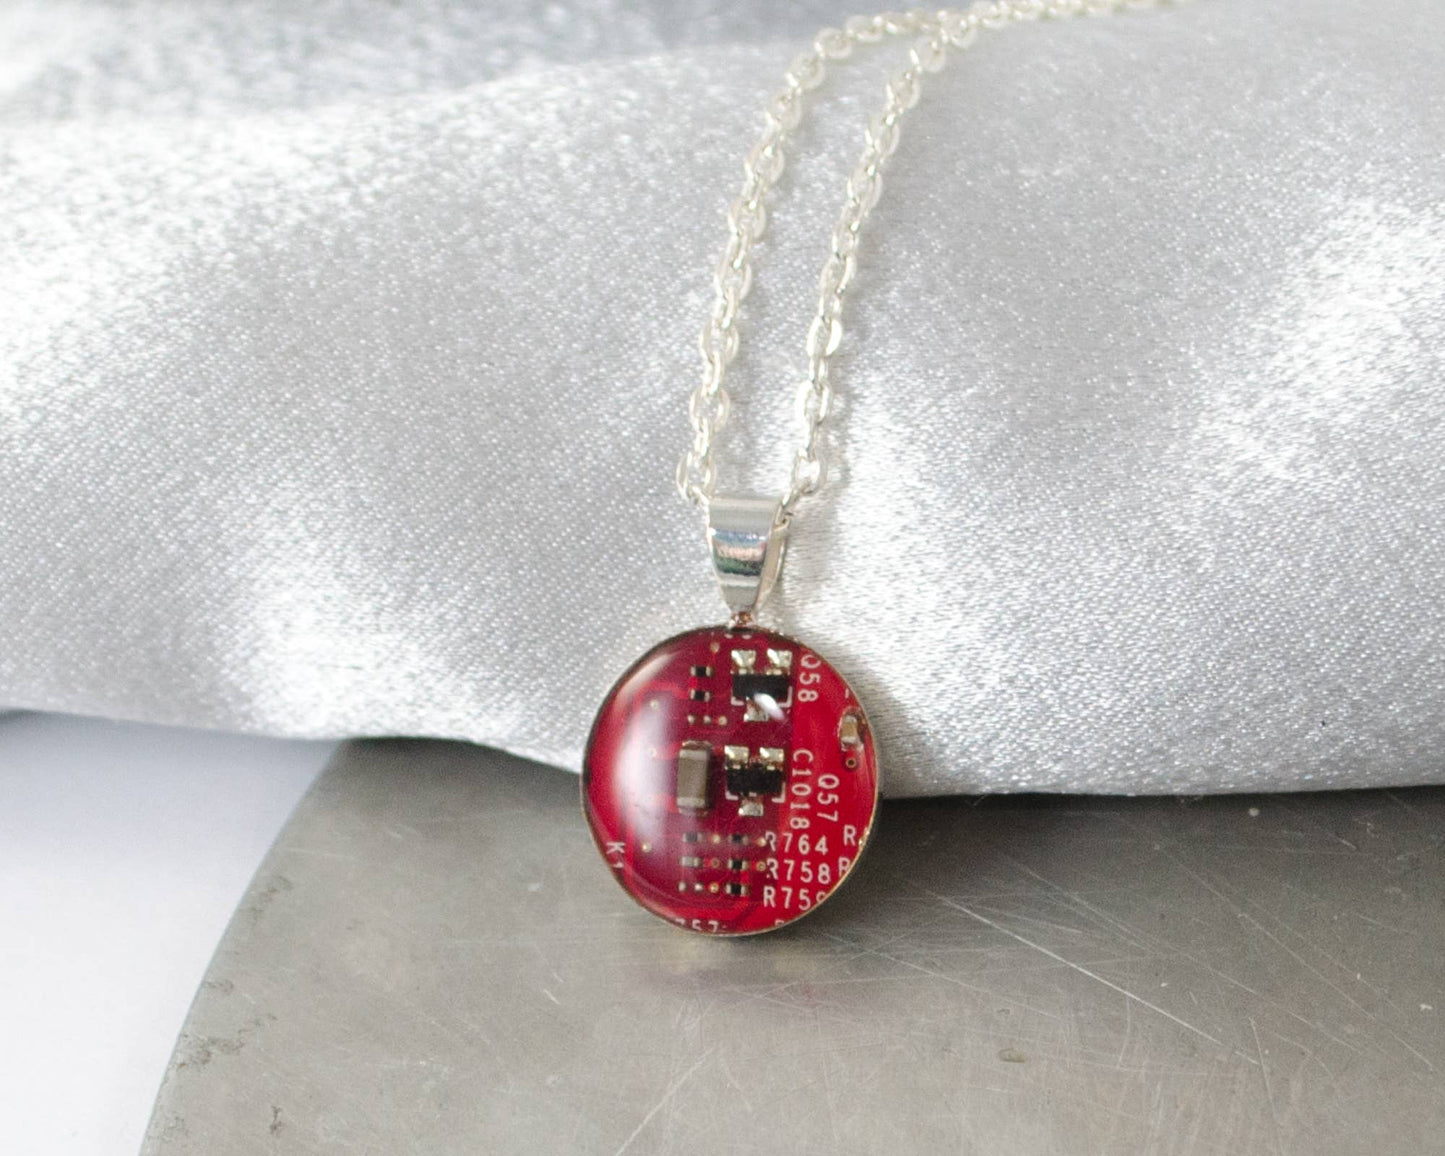 A piece of circuit board has been encased in clear resin and fixed into a circular pendant and hangs on a necklace chain